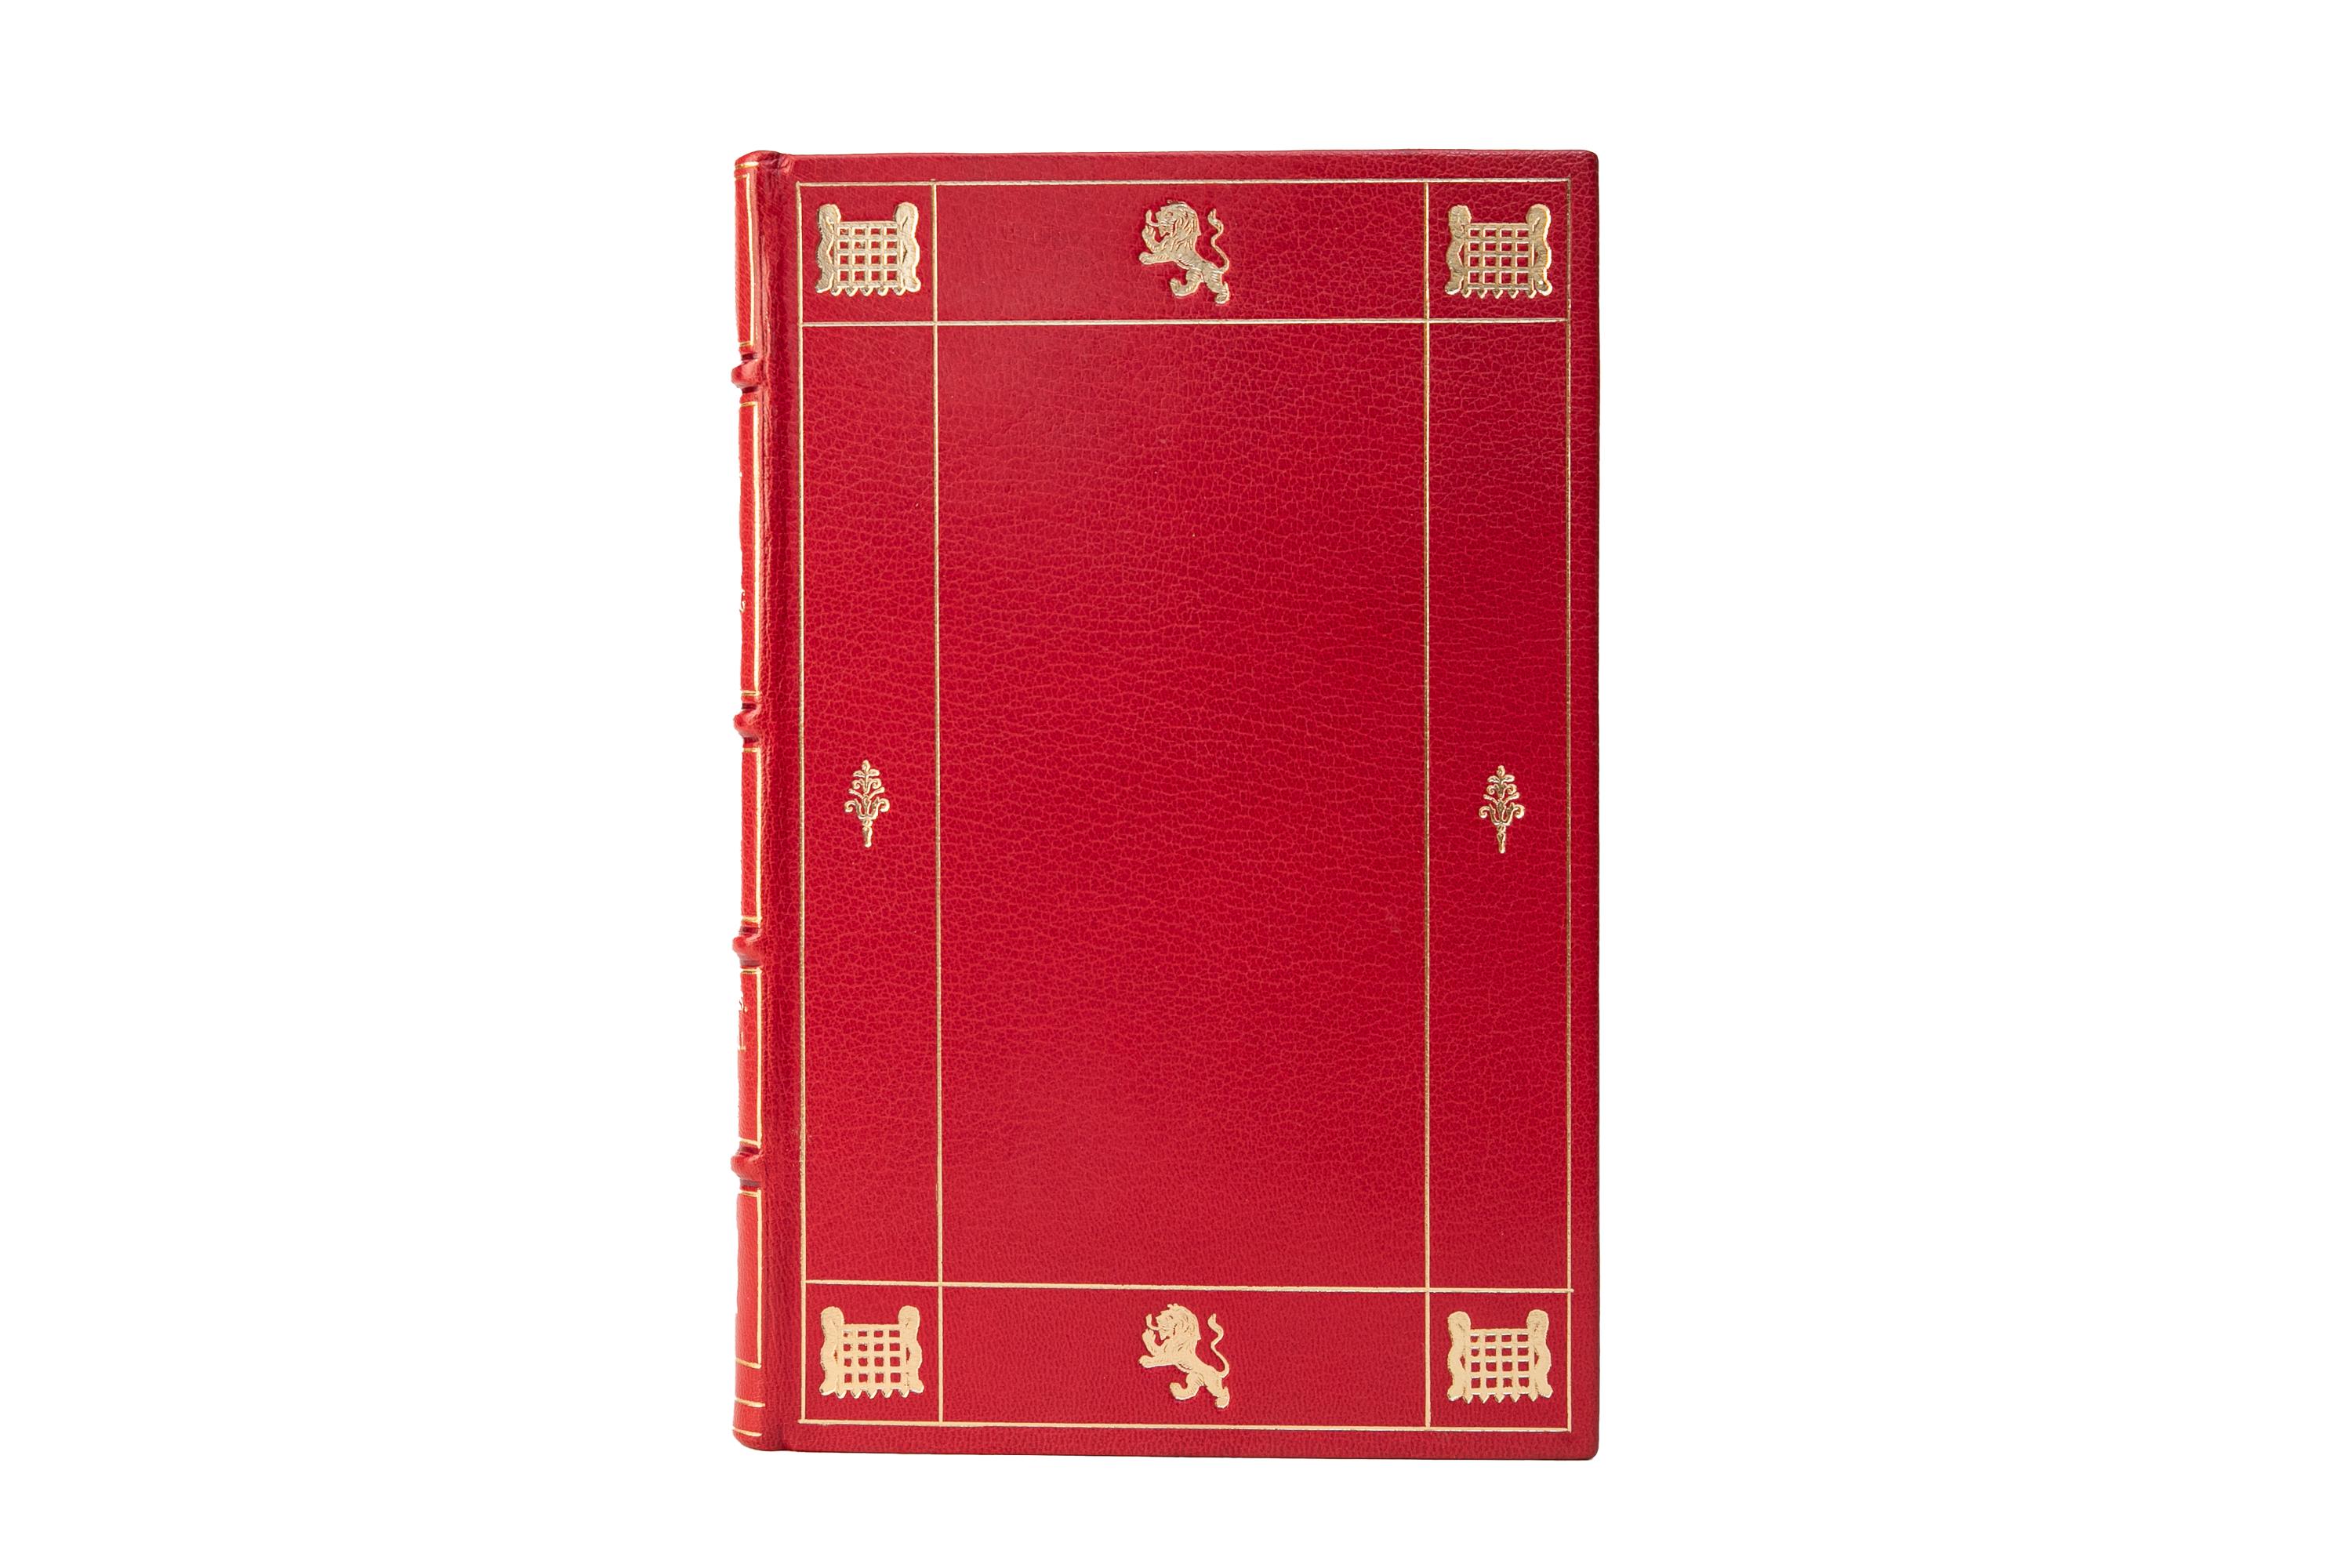 4 Volumes. Winston S. Churchill, A History of English Speaking Peoples. First Edition. Bound in full red morocco with covers displaying rued gilt-tooled borders as well as British detailing. Raised bands with panels displaying lion and gate details